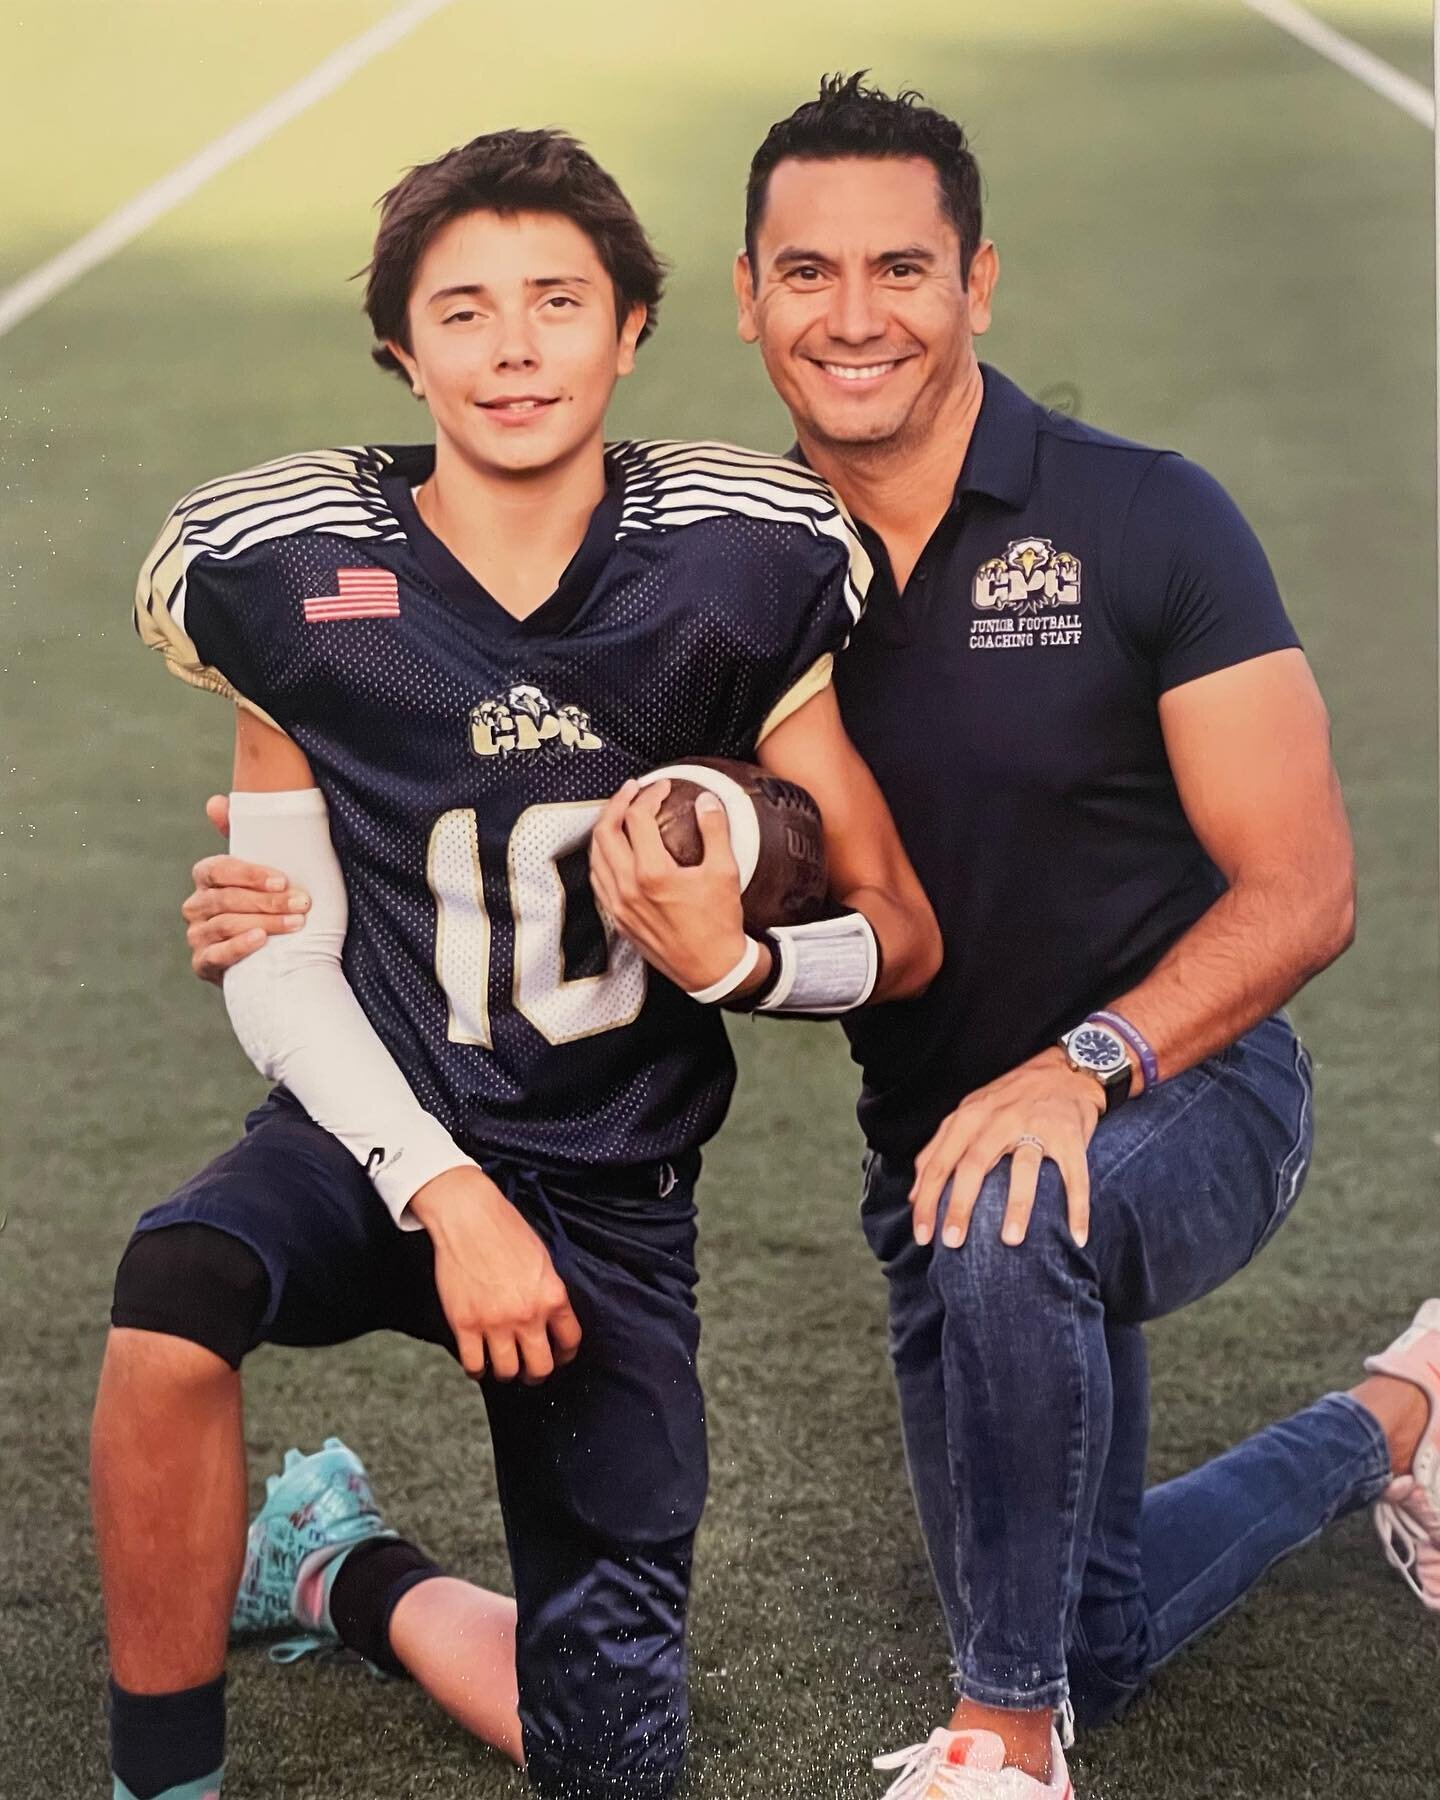 🏈 What a gift to have had the privilege of coaching my son; Elijah #10  @cpcschools for the 2nd year in a row and his last year playing middle-school football. We had a tough season with injuries, losses, team setbacks but he rose above it all. 

🏈